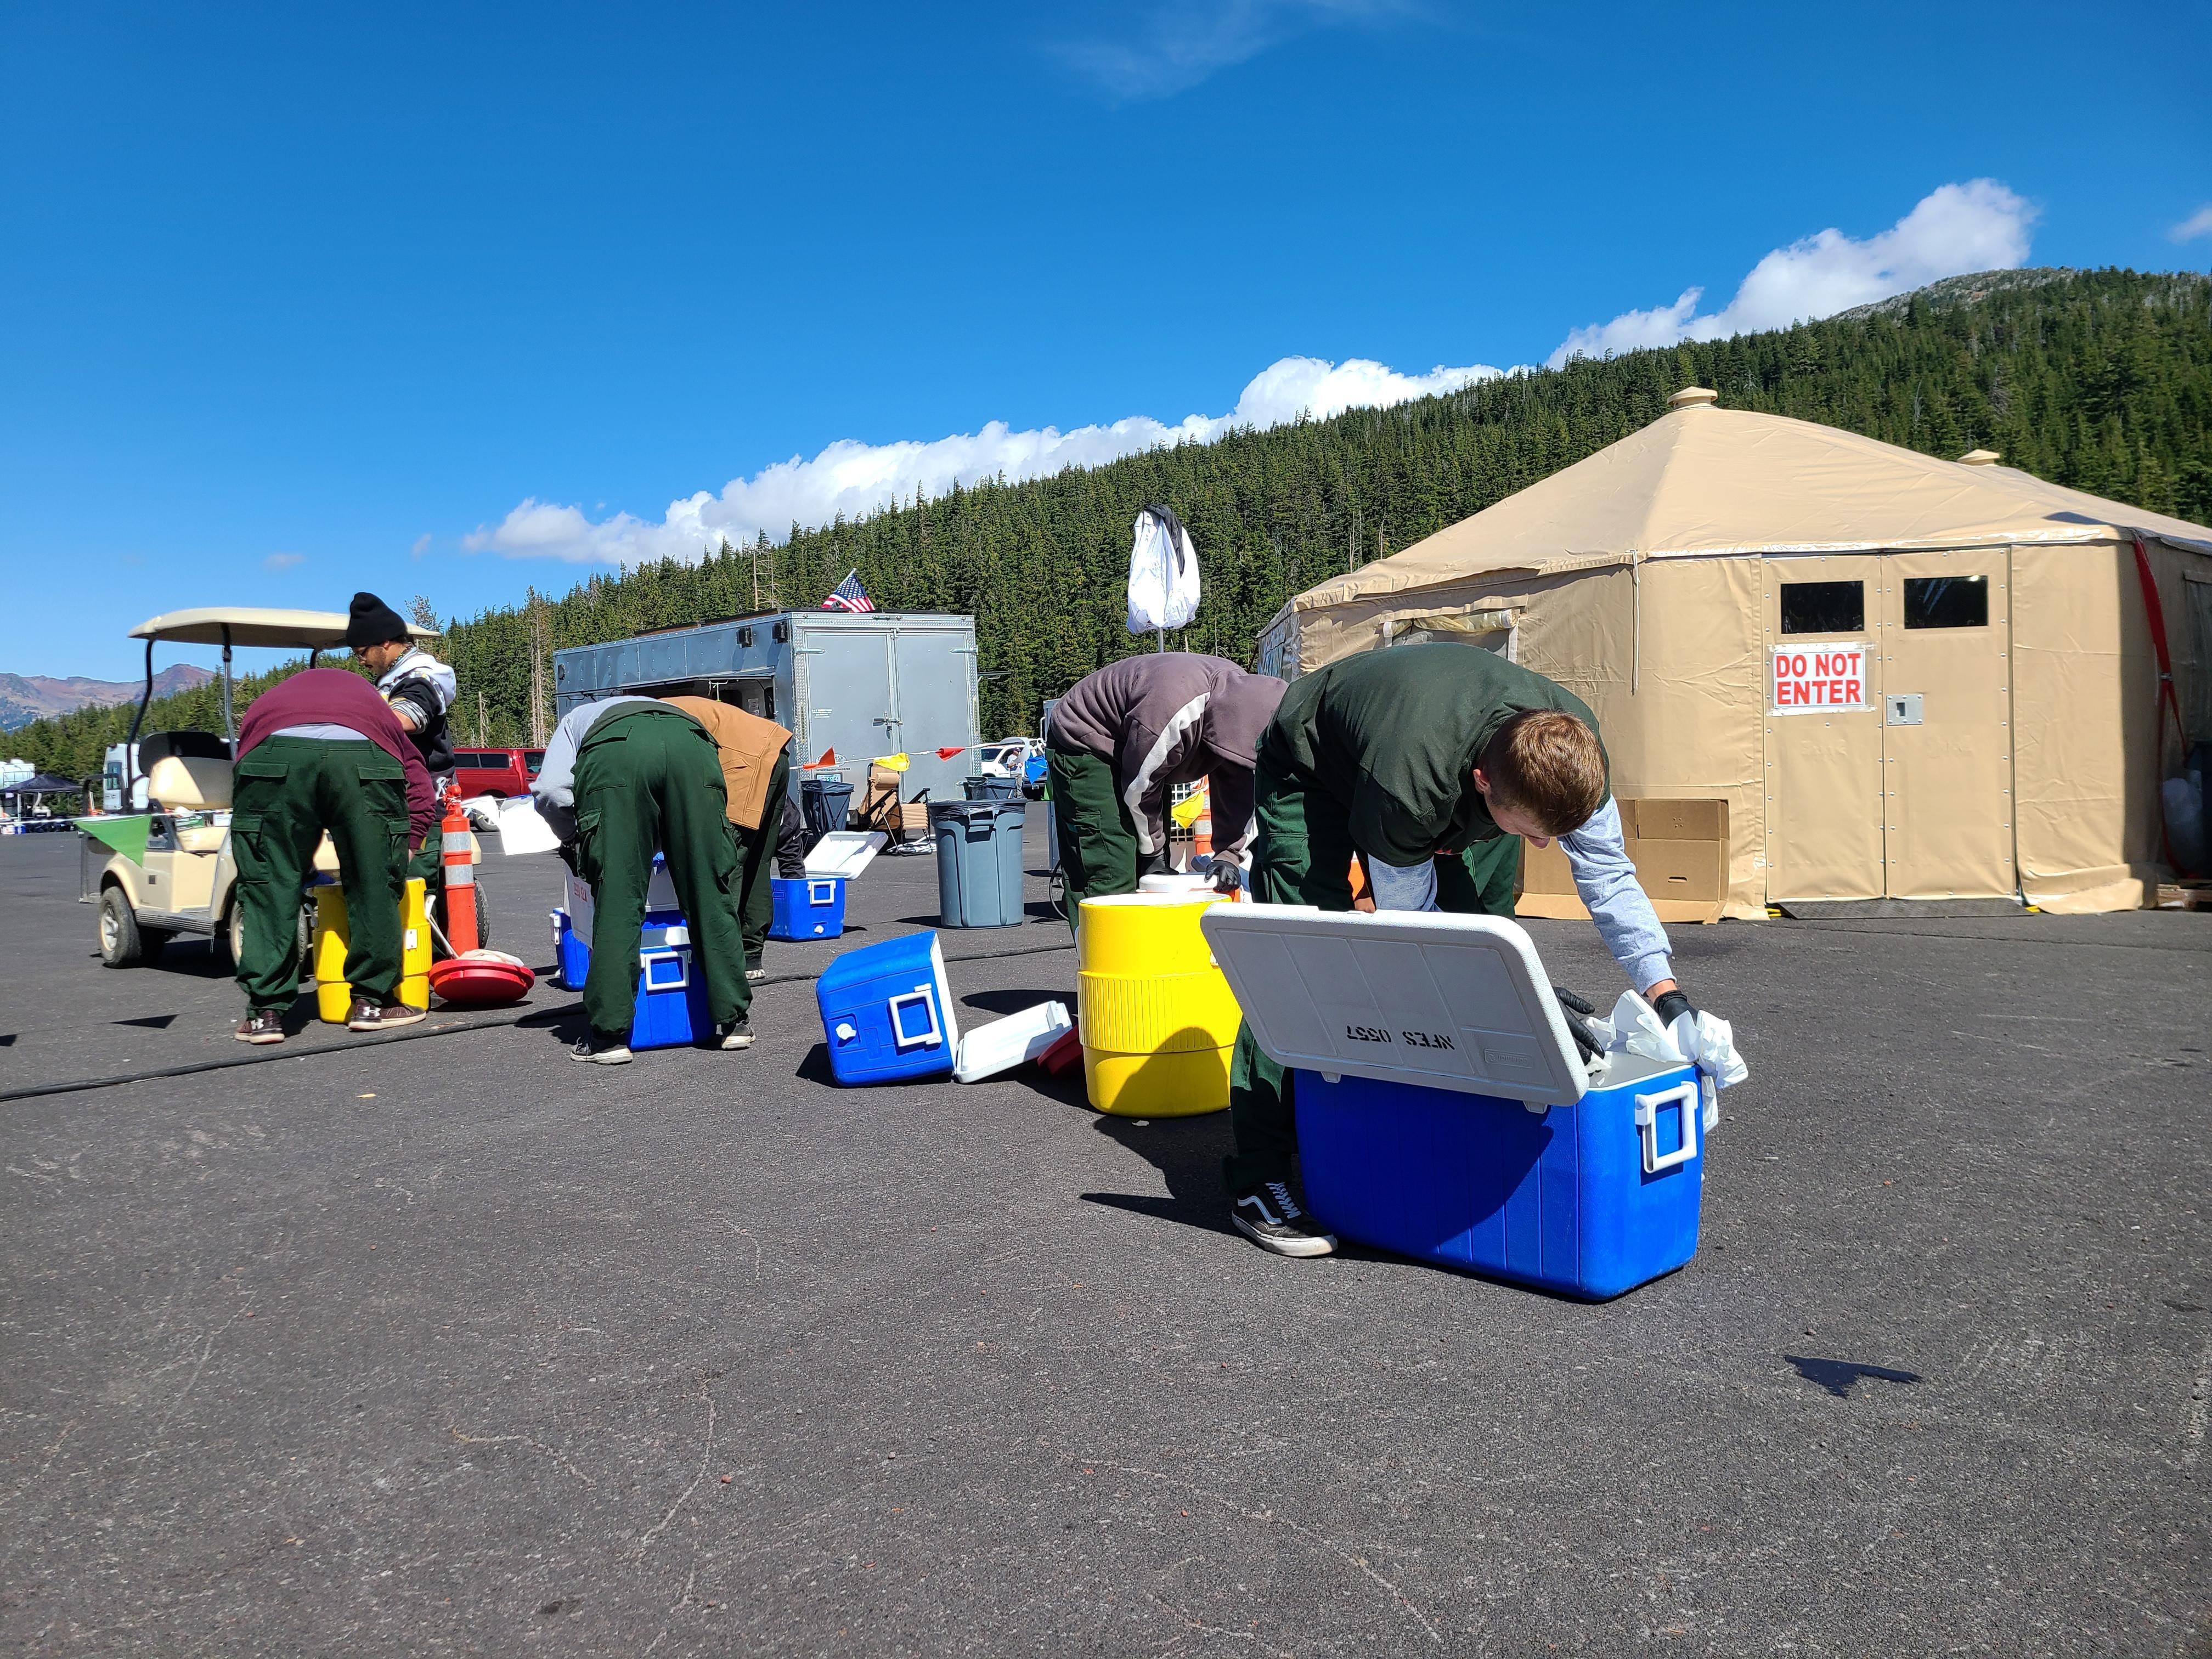 A group of people are bent over cleaning and sanitizing coolers for fire personnel.